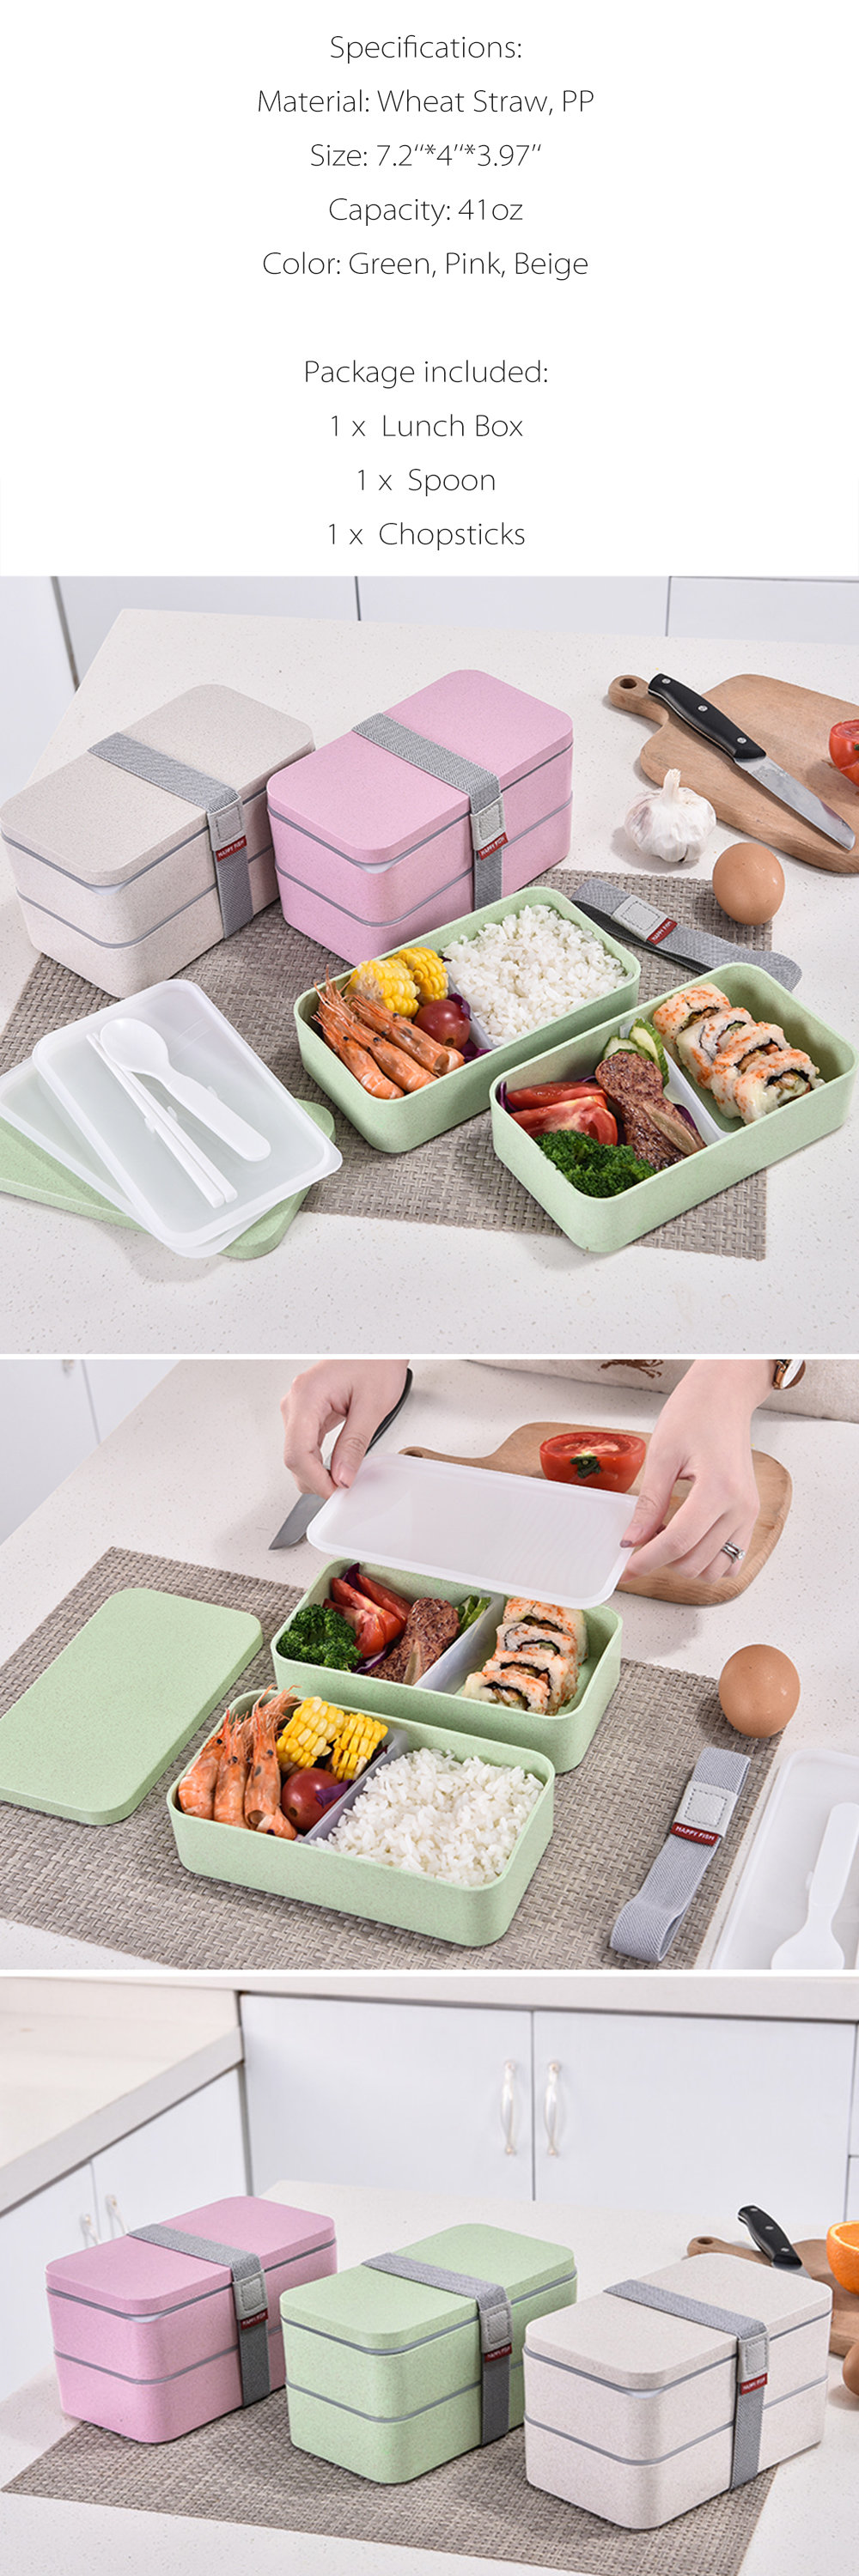 Thermal Lunch Box - Stainless Steel - 3 Colors Available from Apollo Box